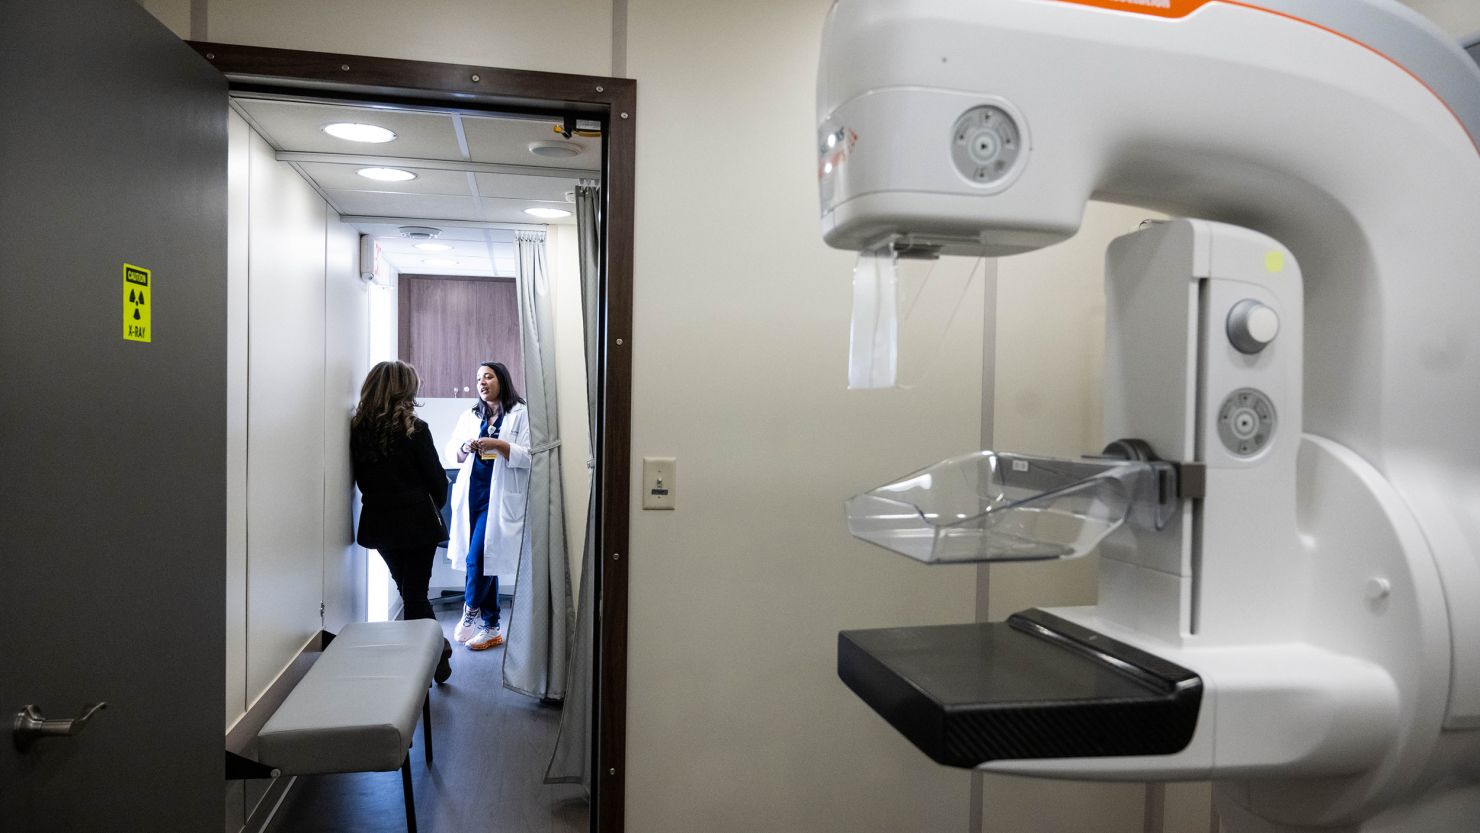 The USPSTF recommends biennial screening mammography for women ages 40 to 74.